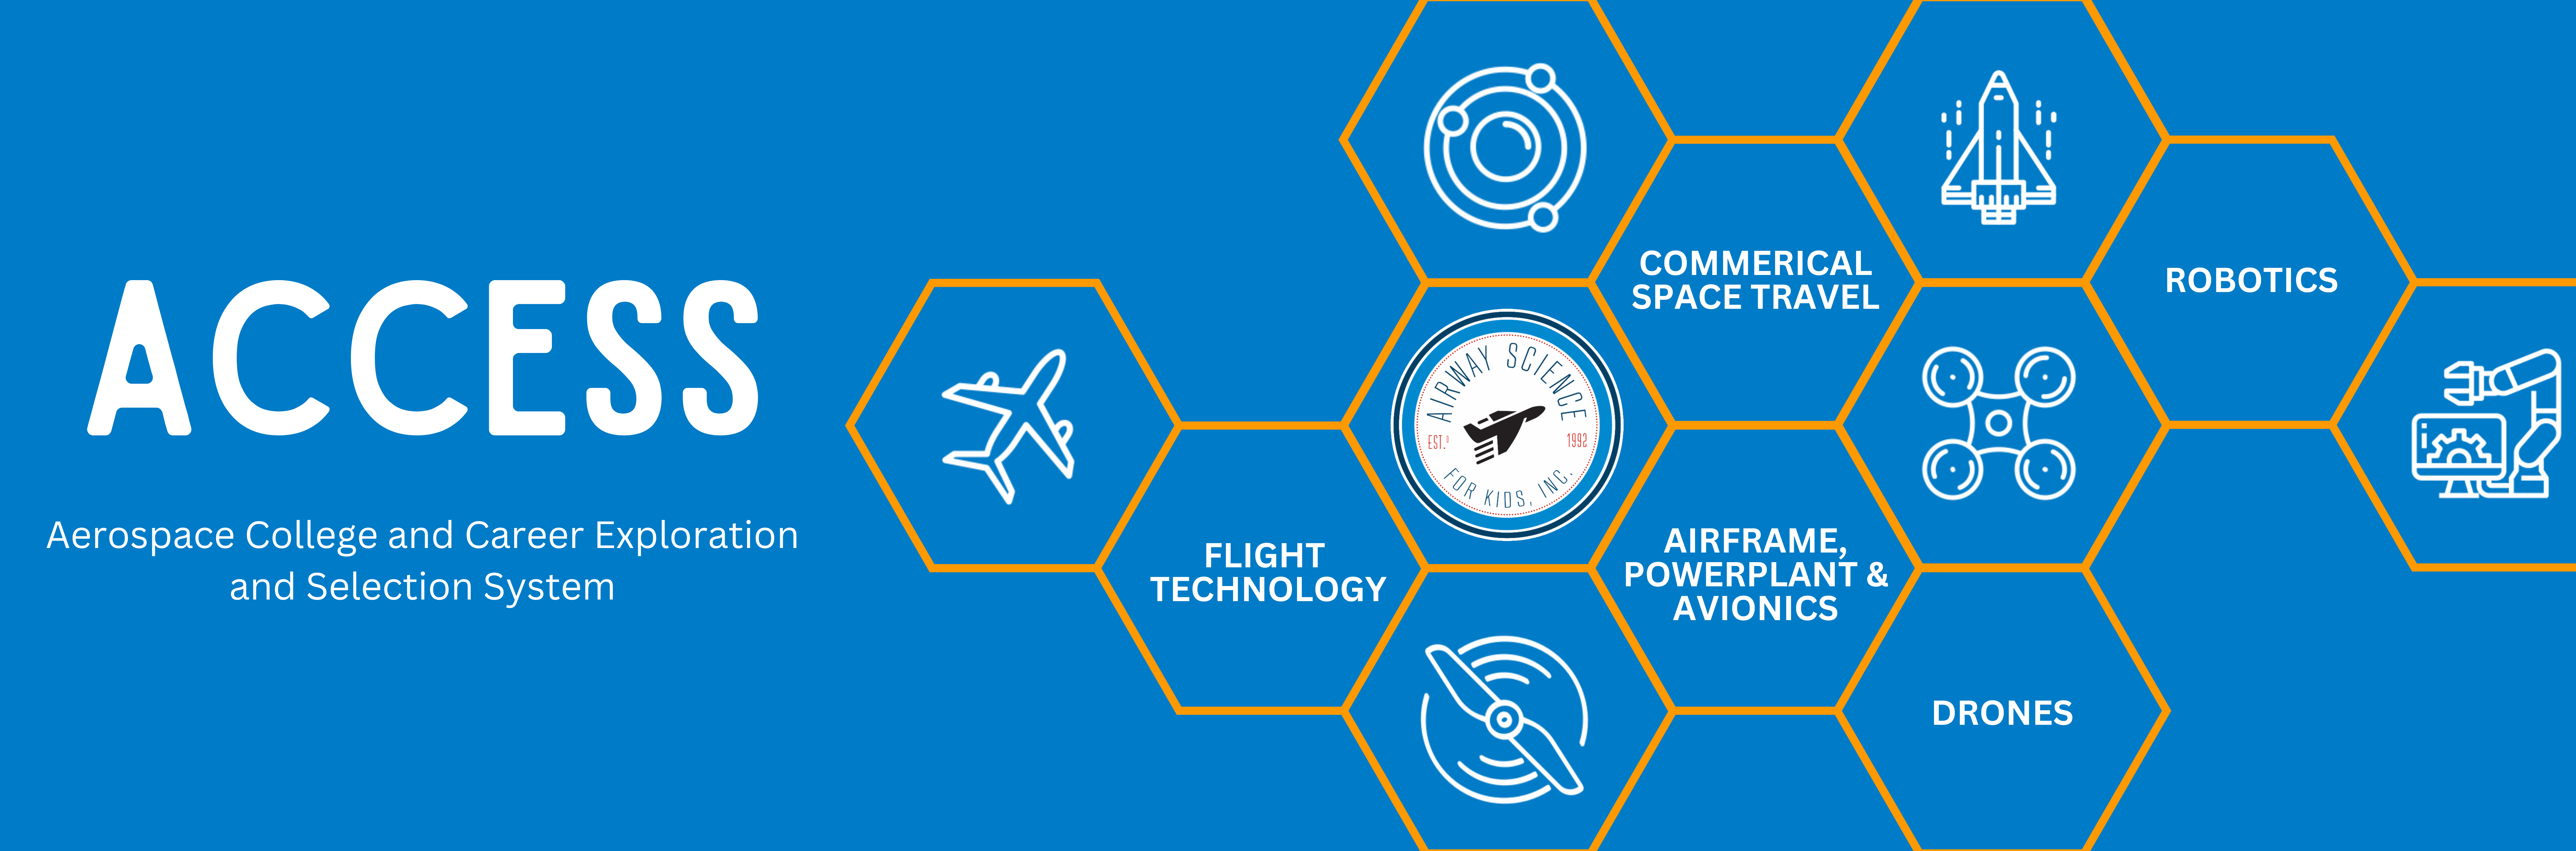 Aerospace College and Career Exploration System explores Drones, Robotics, Aviation, Commercial Space Travel and Drones